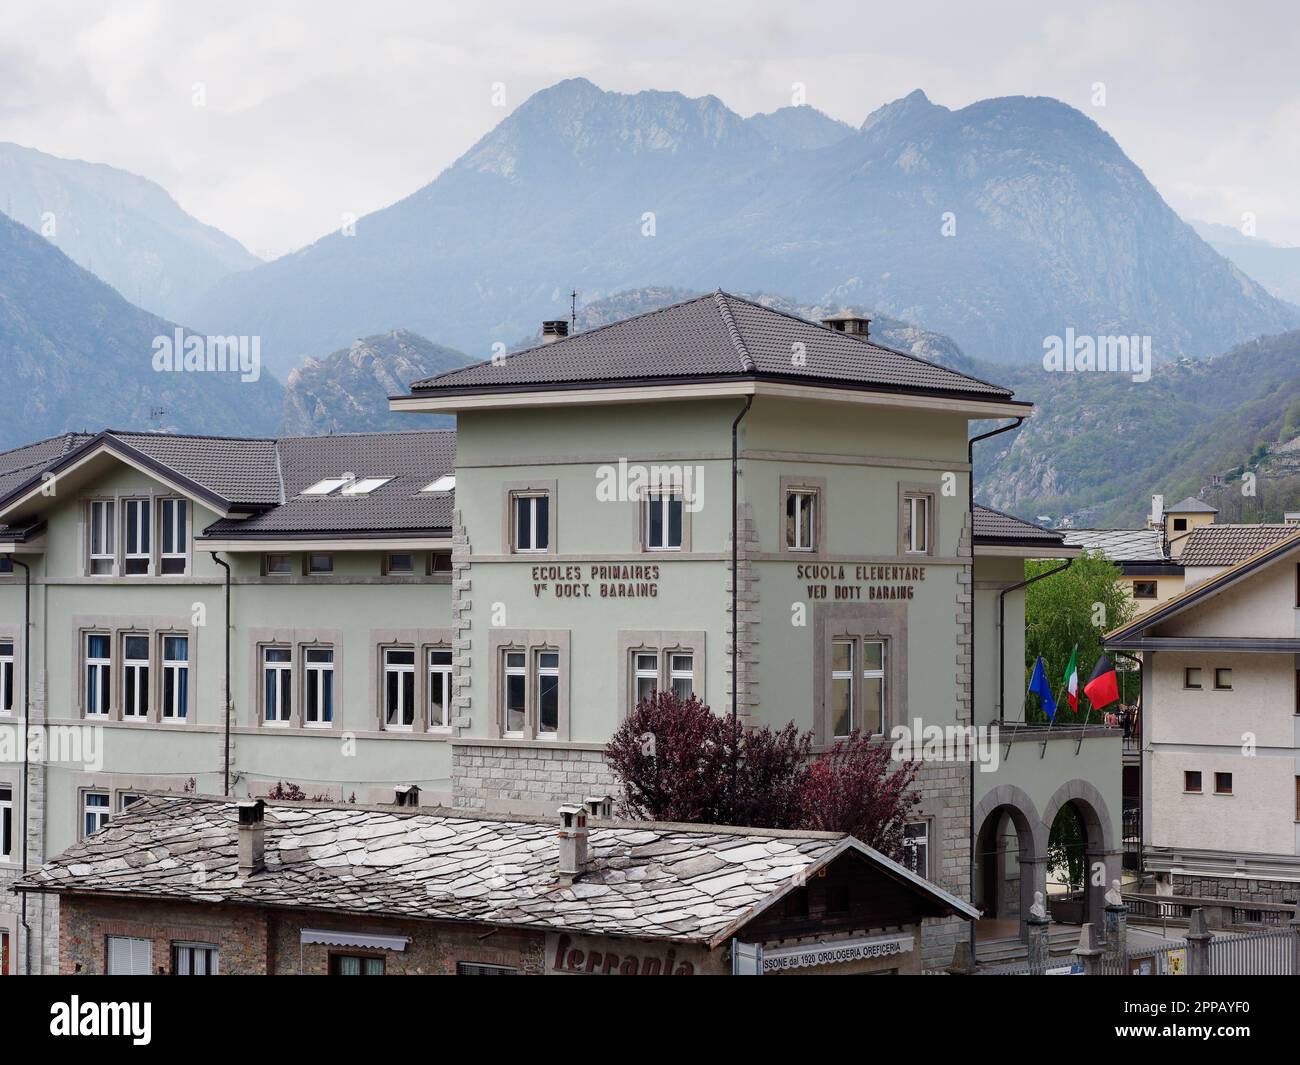 TLarge elementary school in the town of Pont-Saint-Martin, Aosta Valley, NW Italy. Valley and mountains behind Stock Photo